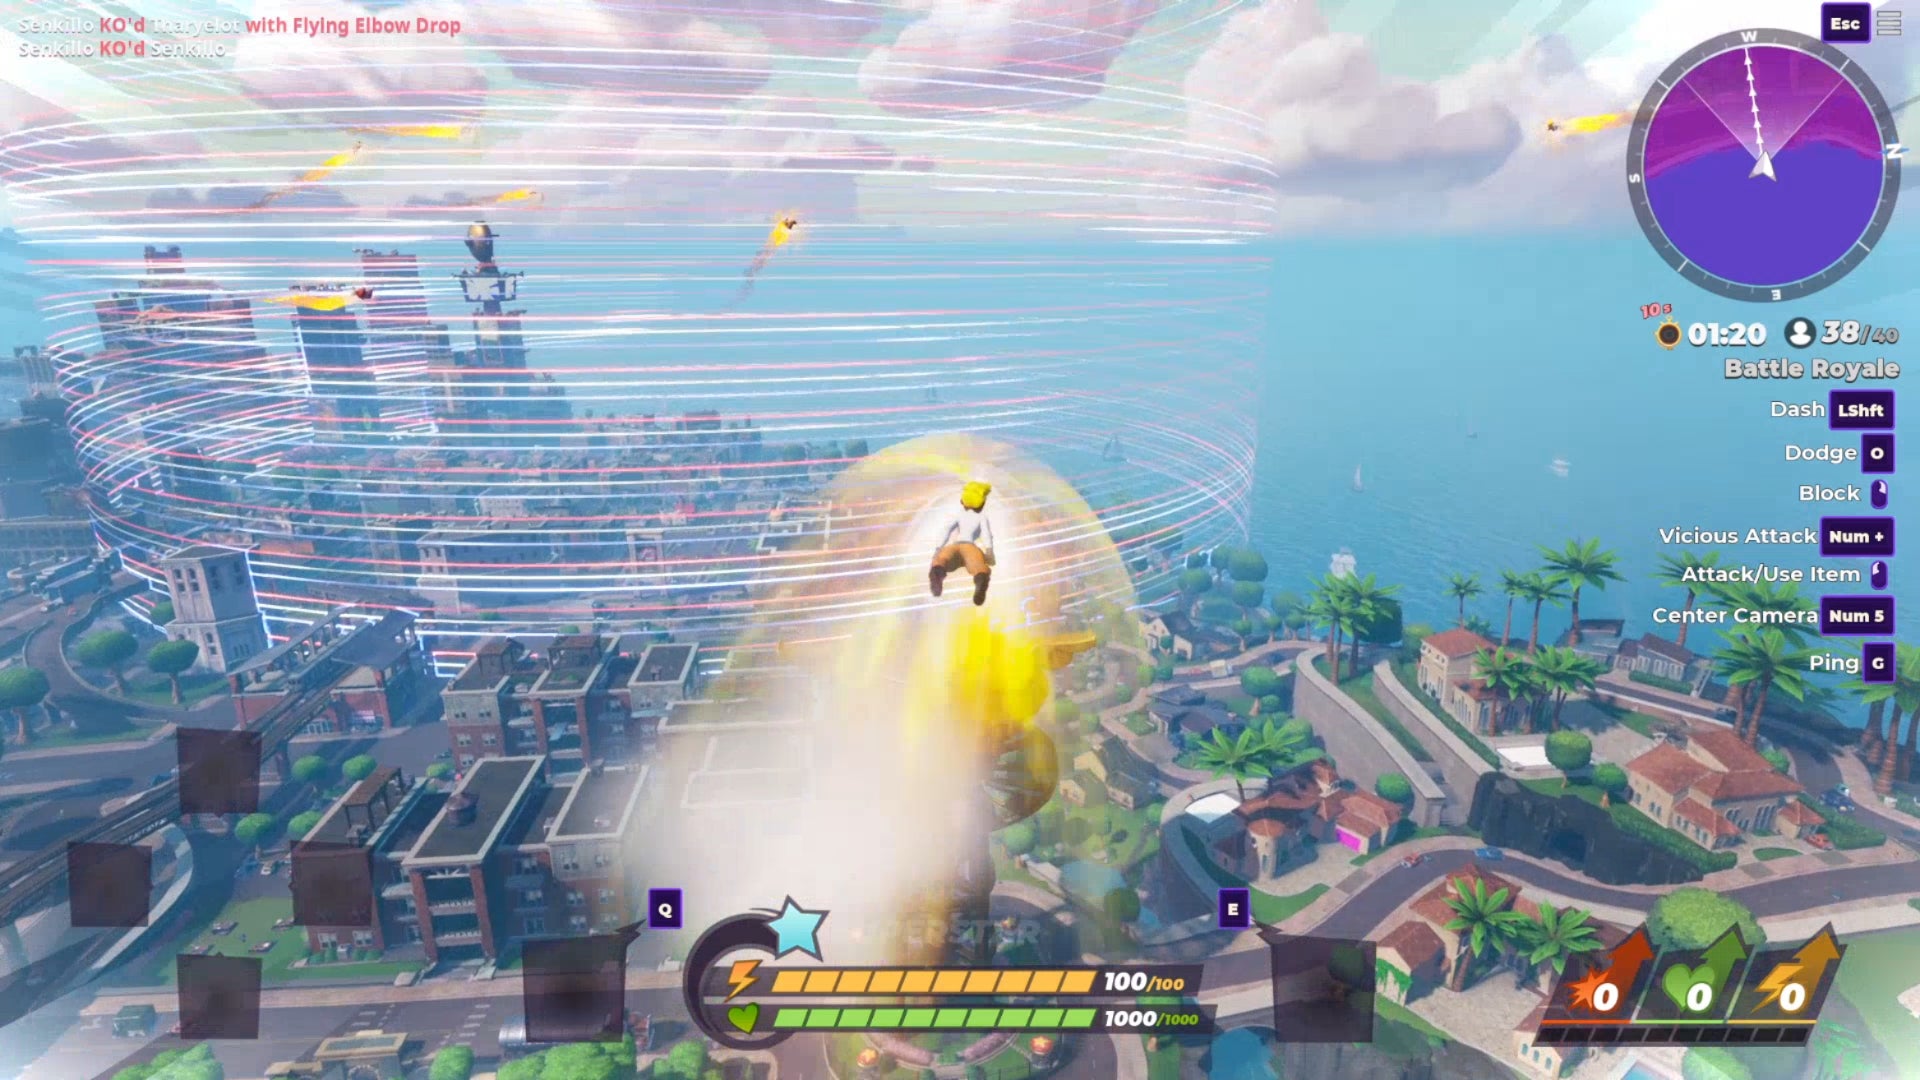 A player at the start of a Rumbleverse match being fired out of a cannon into the Grapital City map.